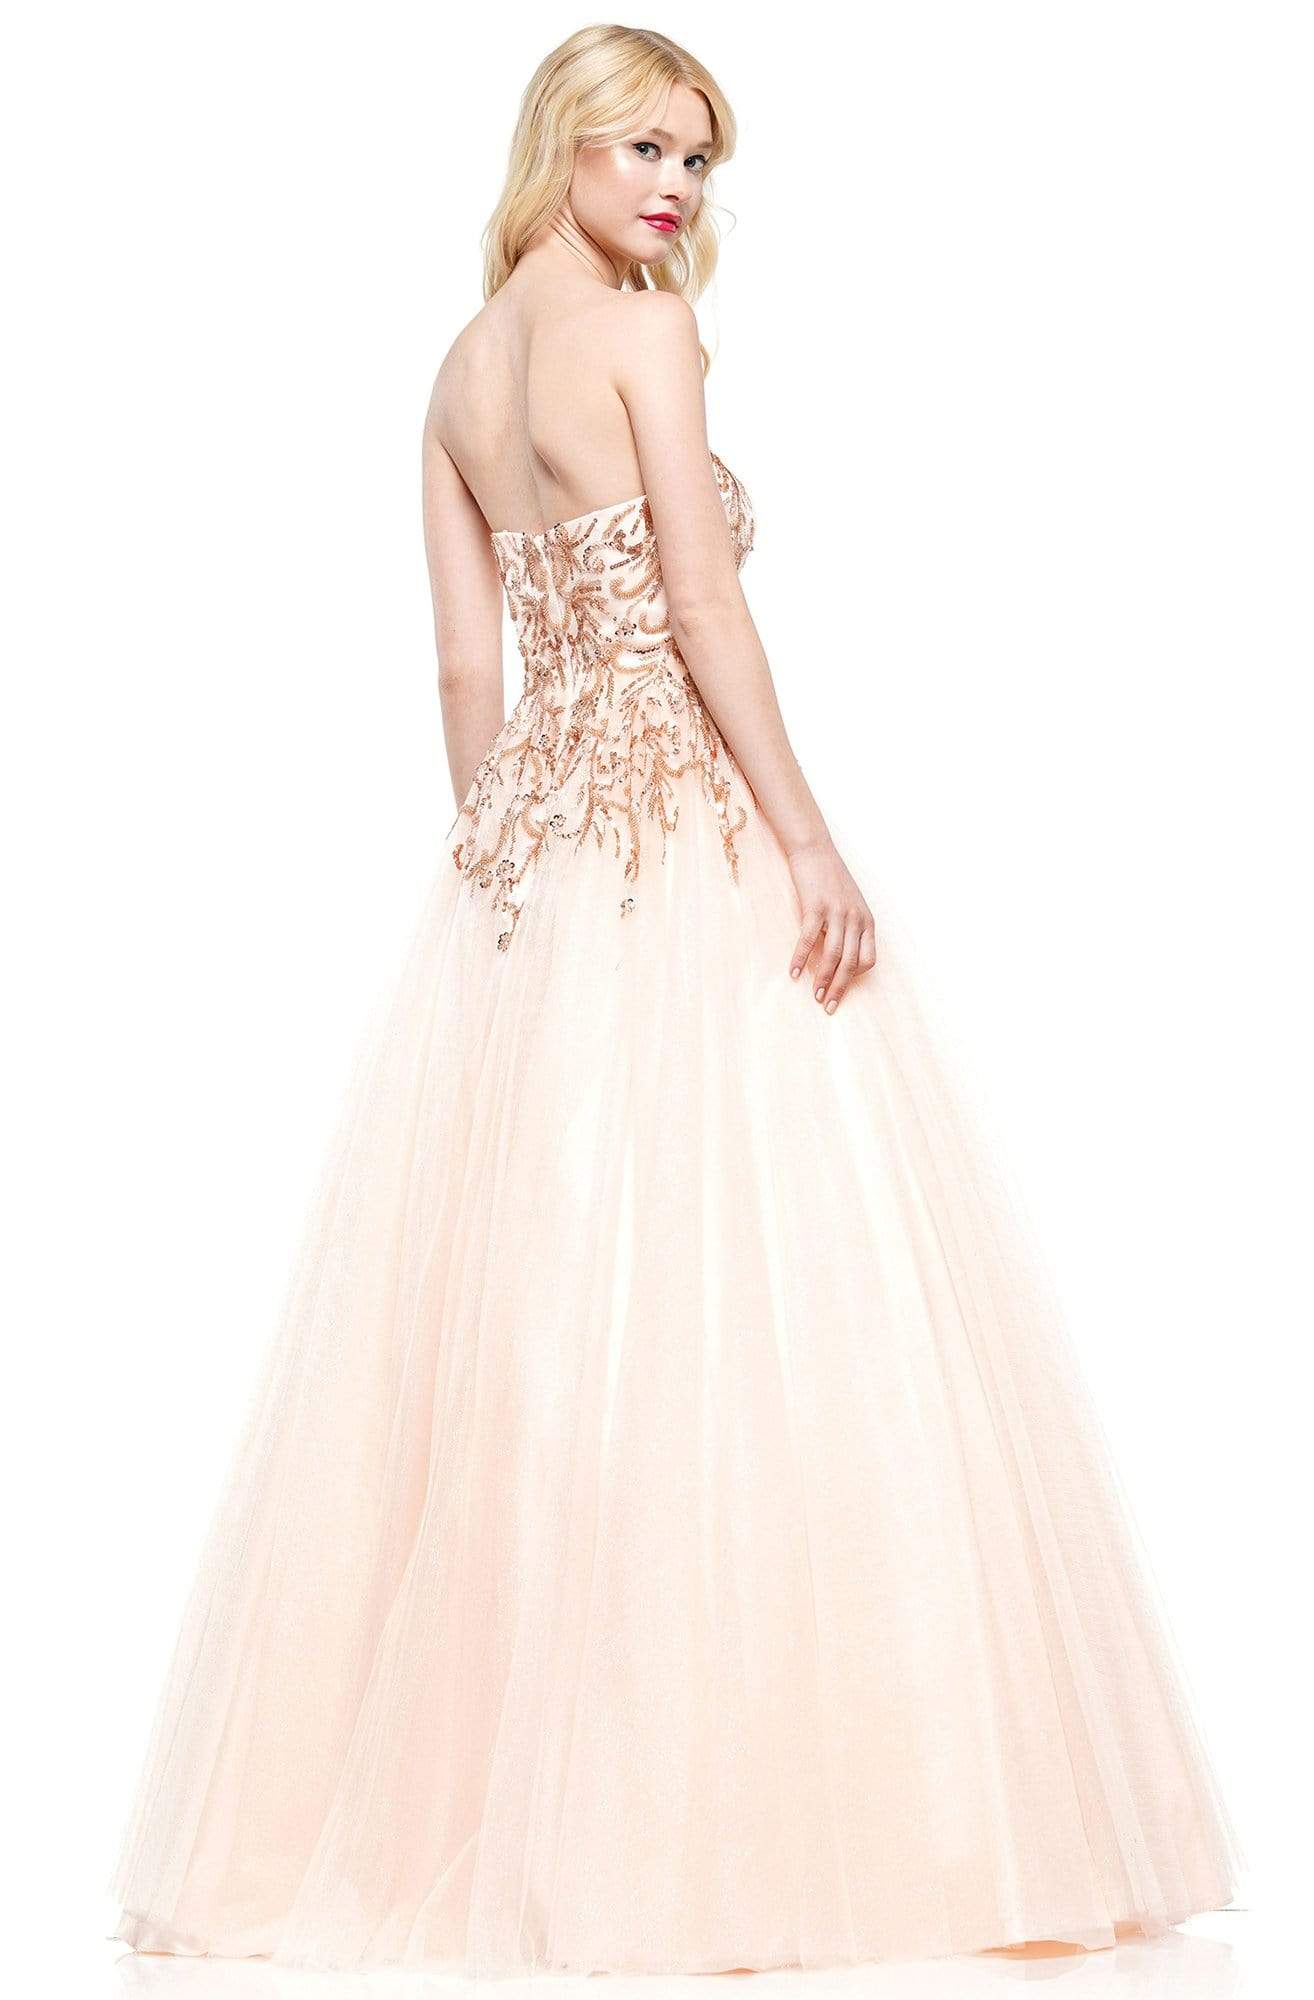 Colors Dress - 2226 Strapless Swirl-Motif Glitter Tulle Gown In Pink